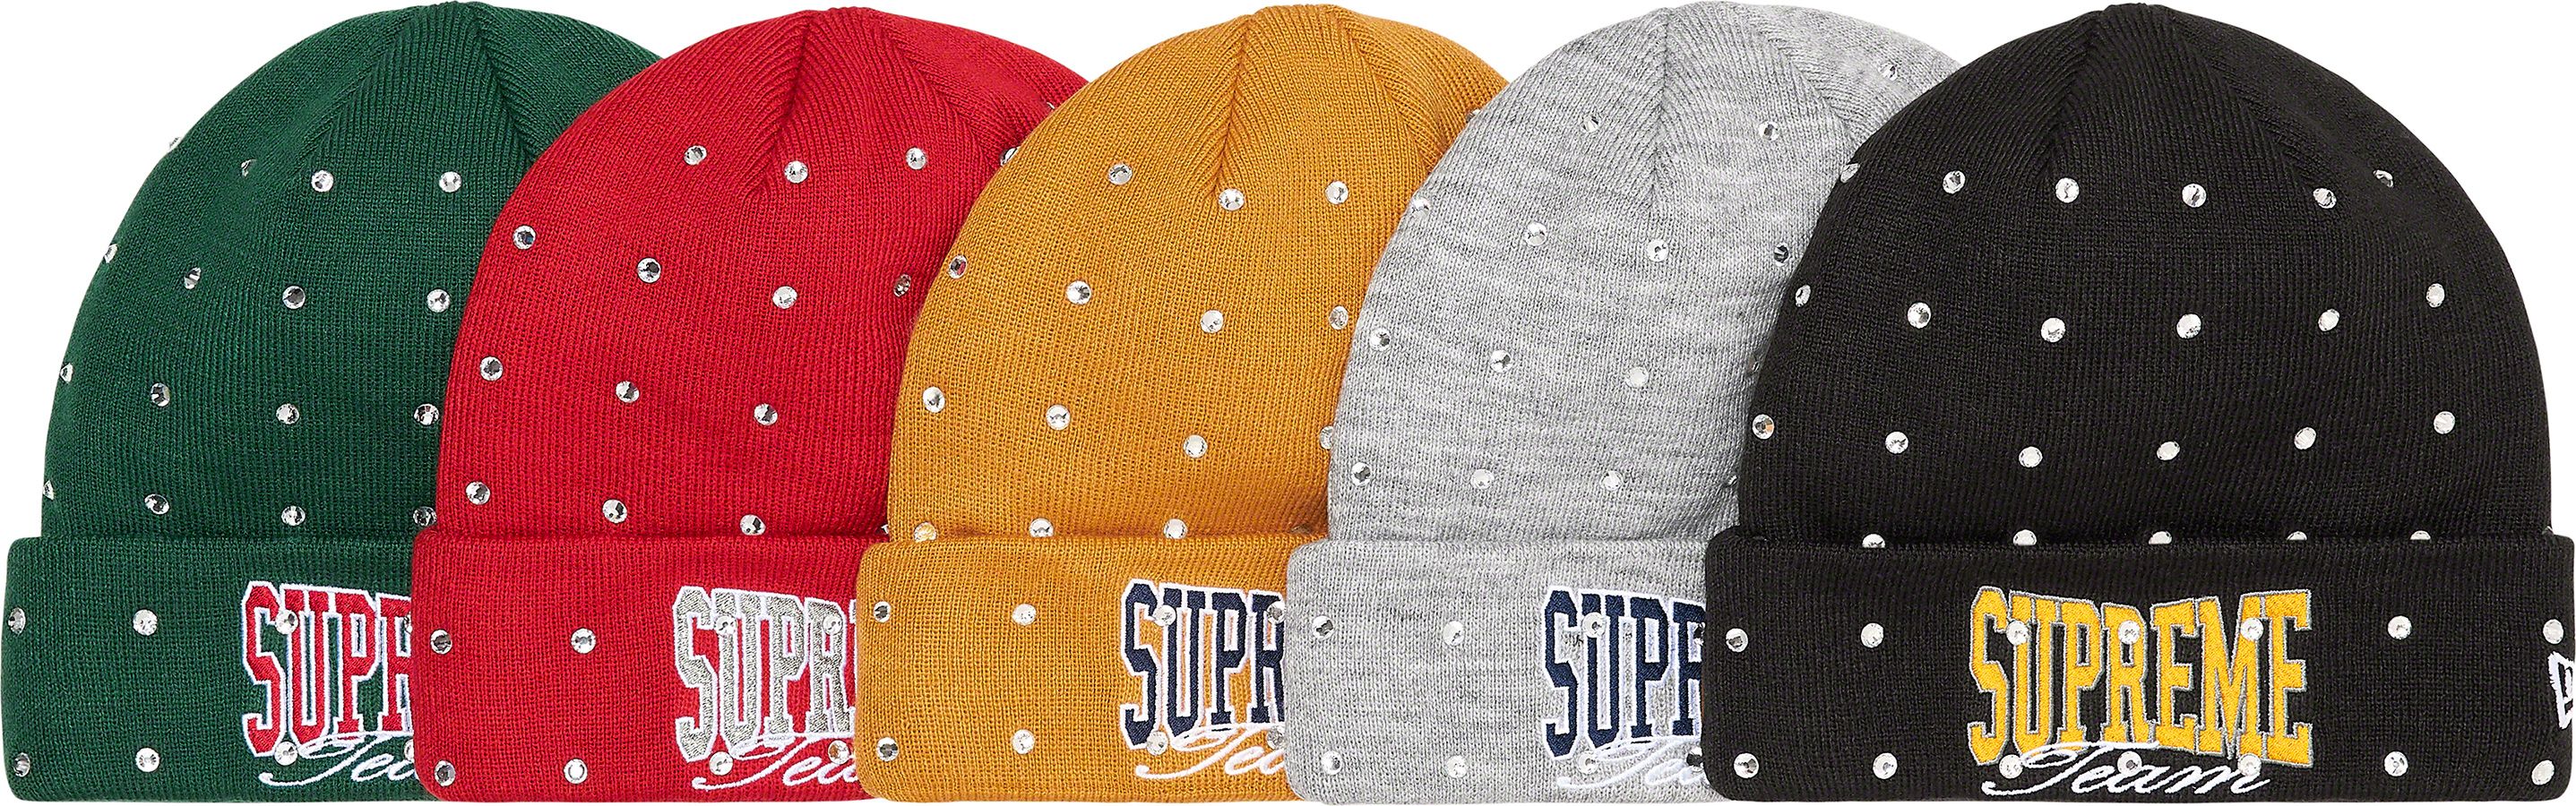 Loose Gauge Beanie - Fall/Winter 2021 Preview – Supreme